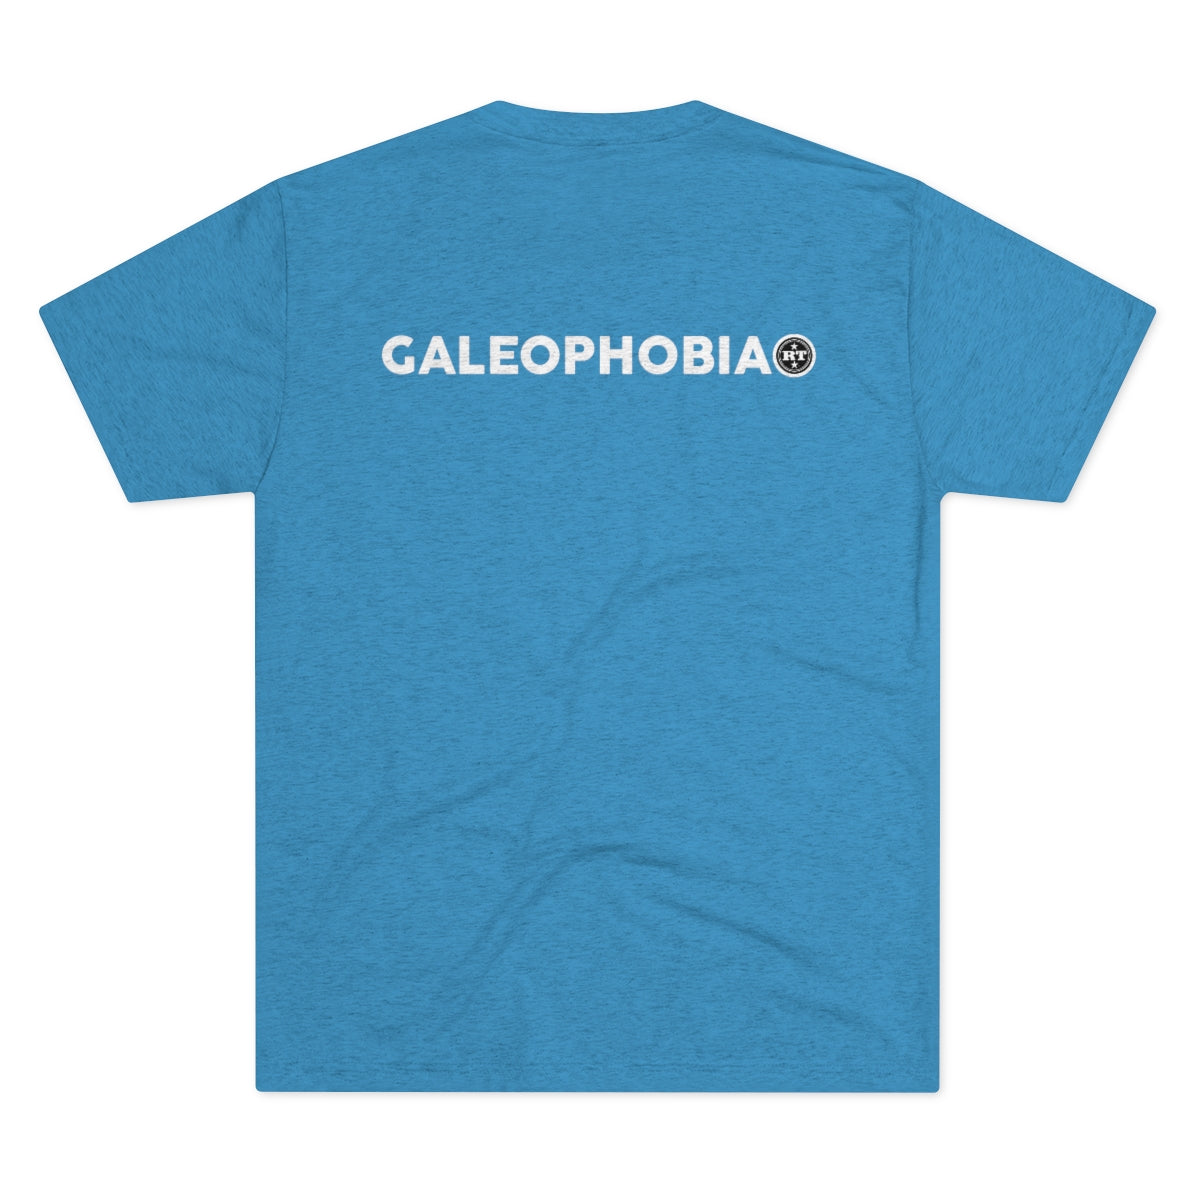 Special Collection – Phobia: Galeophobia – Unisex Tri-Blend Crew Tee.